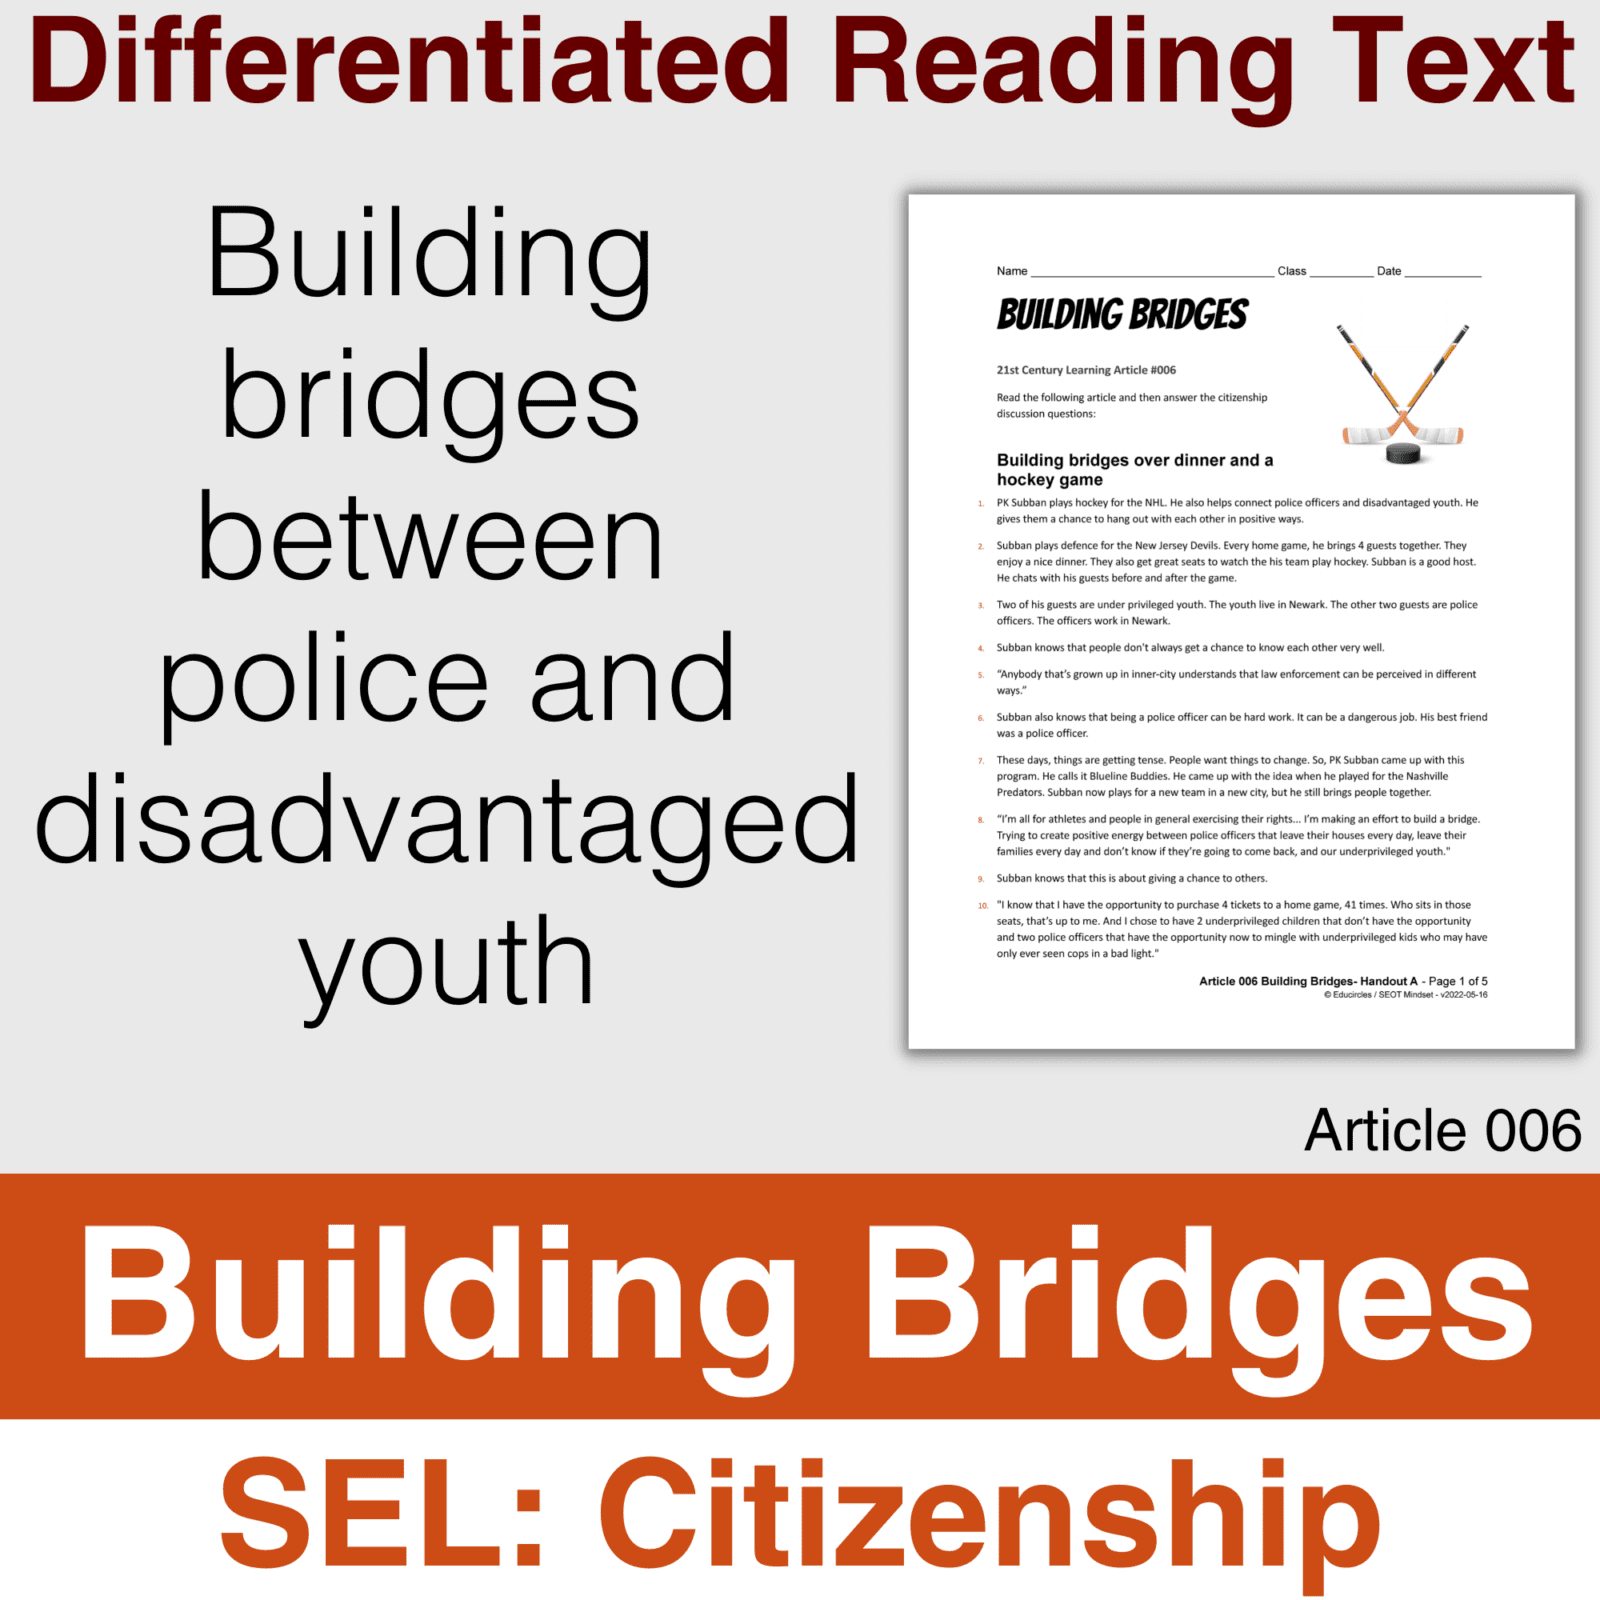 Differentiated Reading Text: Building Bridges between Police and Disadvantaged Youth - Social-Emotional Learning: Citizenship